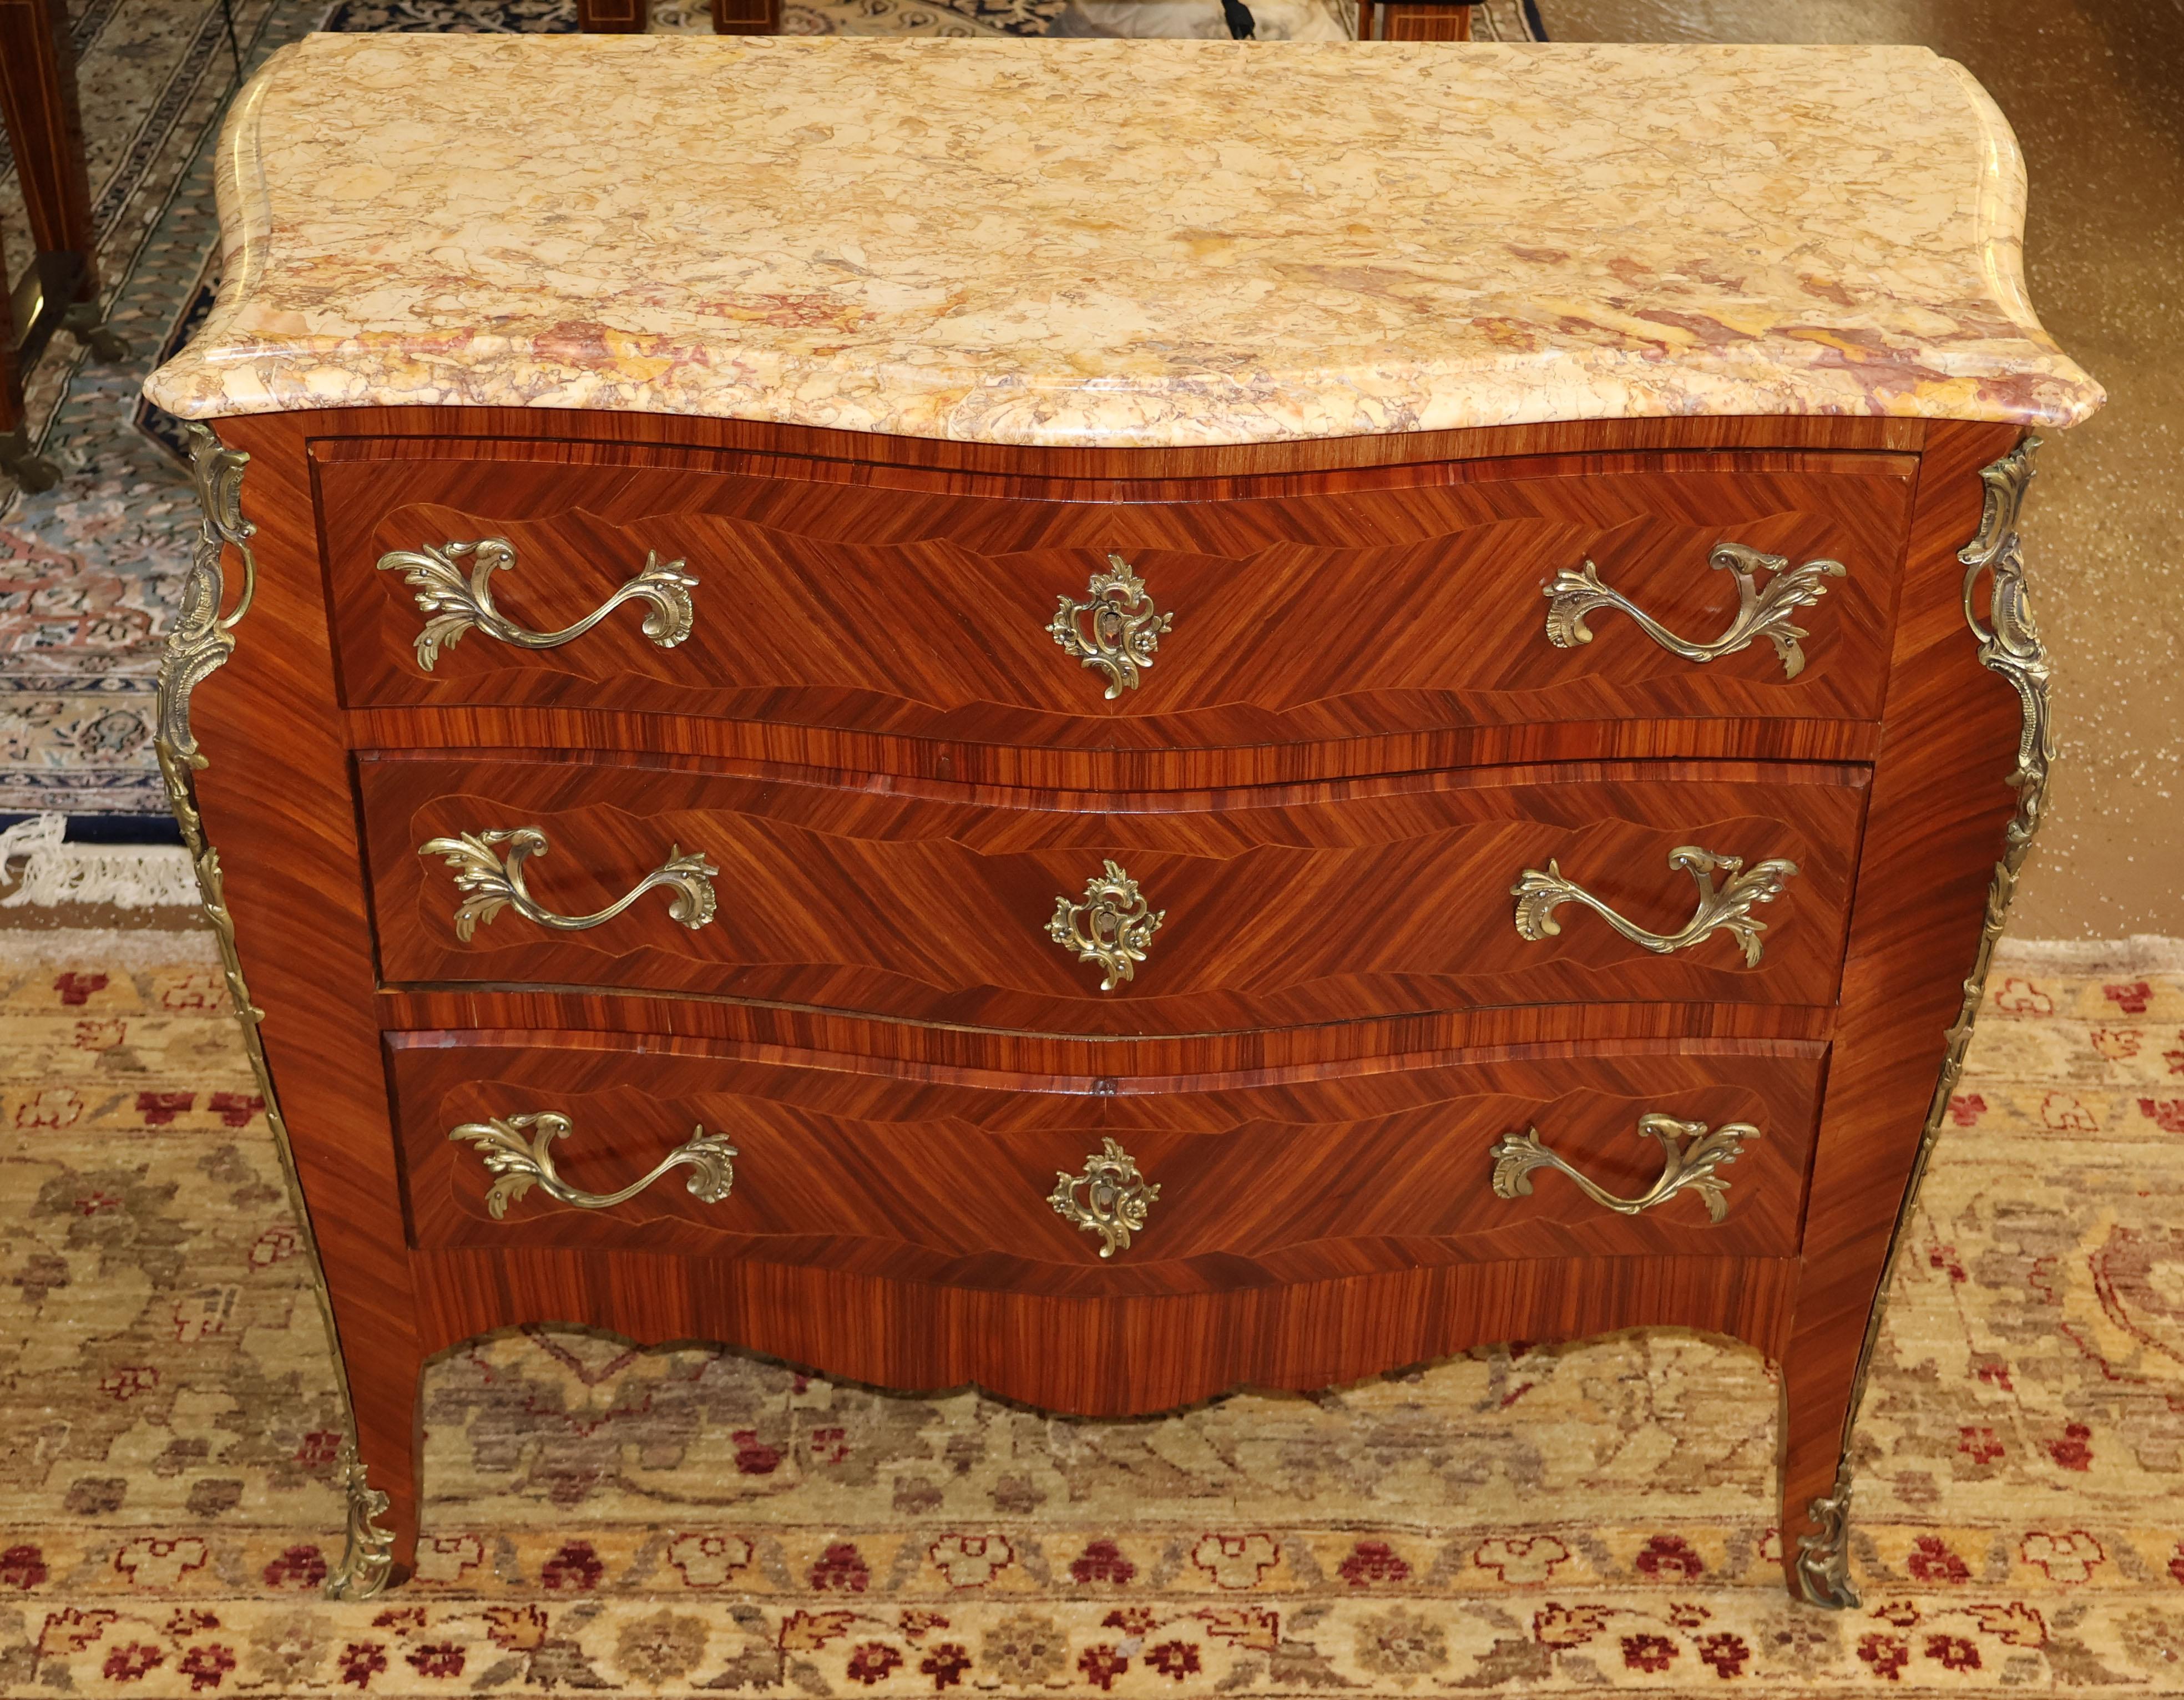 ​Italian Kingwood Marble Top Bronze Mounted Dresser Commode Chest of Drawers

Dimensions : 40